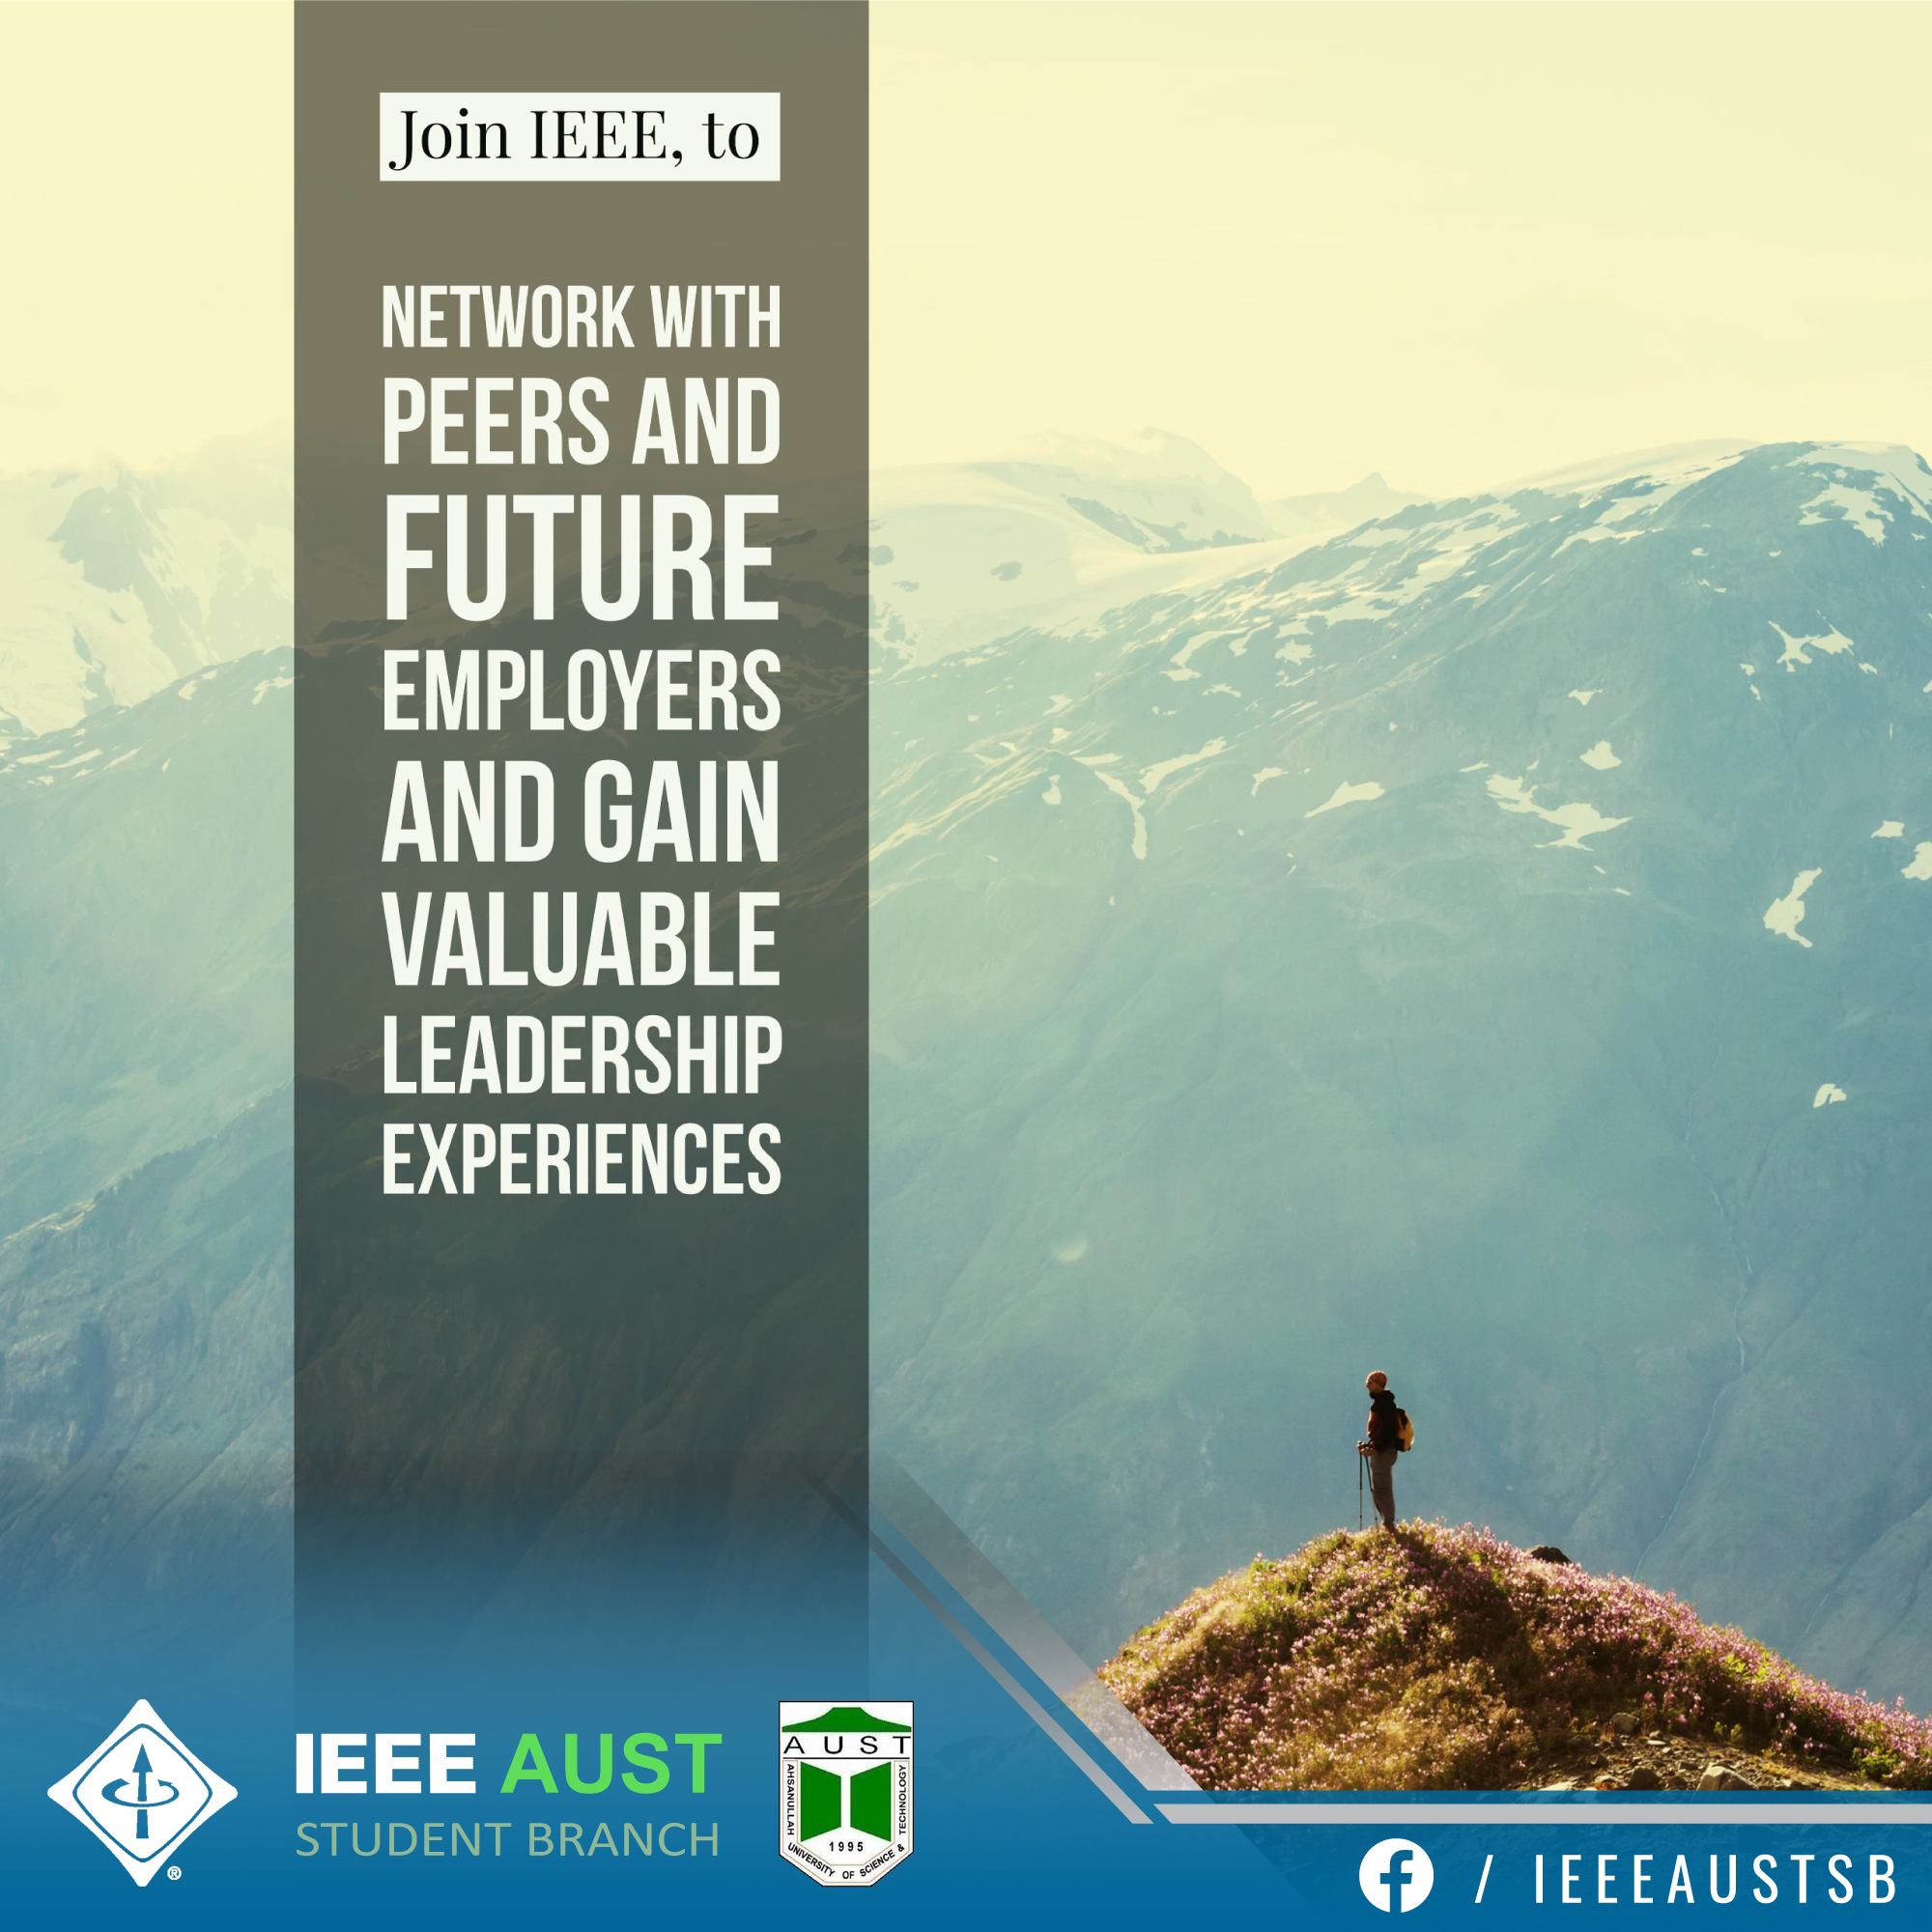 Join IEEE to network with peers and future employers in your field, gaining valuable leadership experiences and making career contacts.